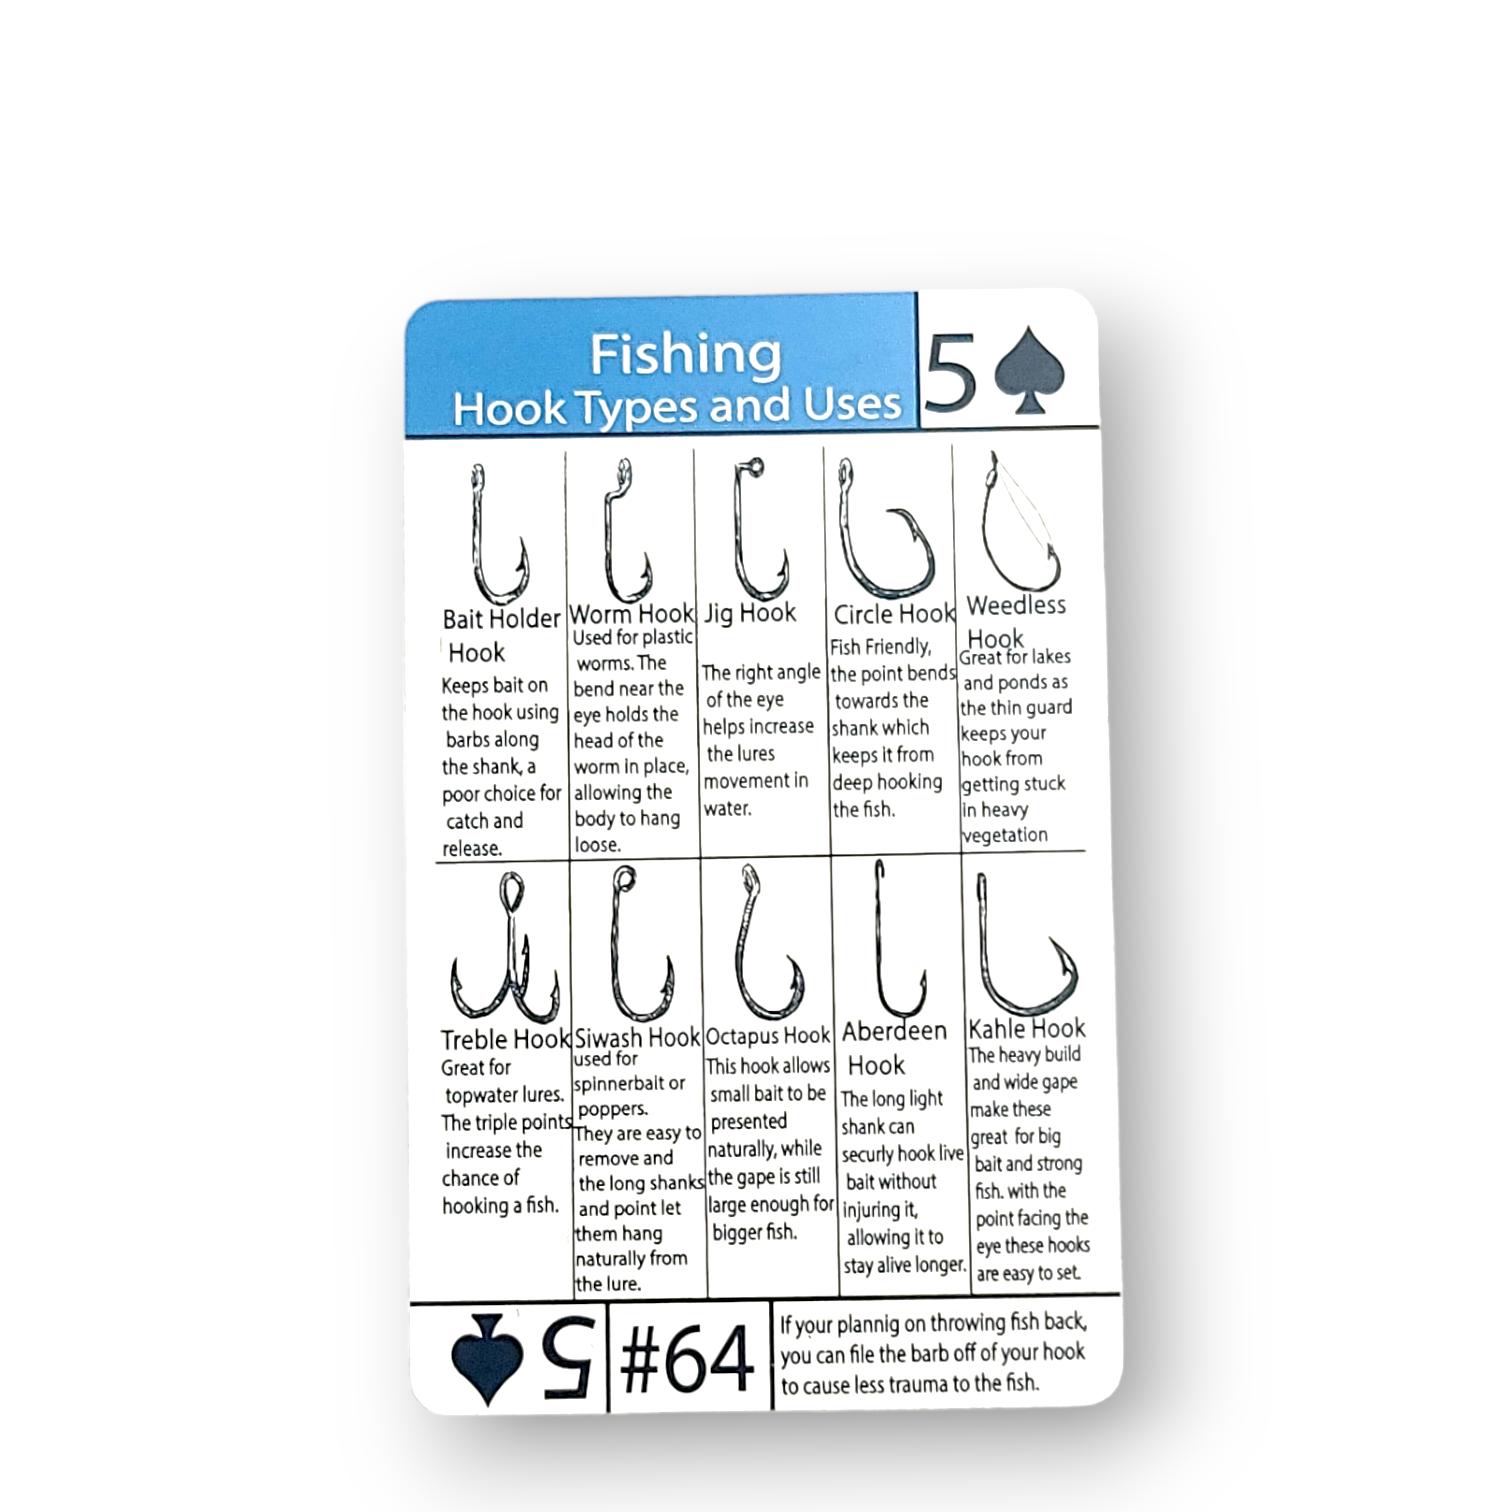 #64 Fishing Hook Types and Uses